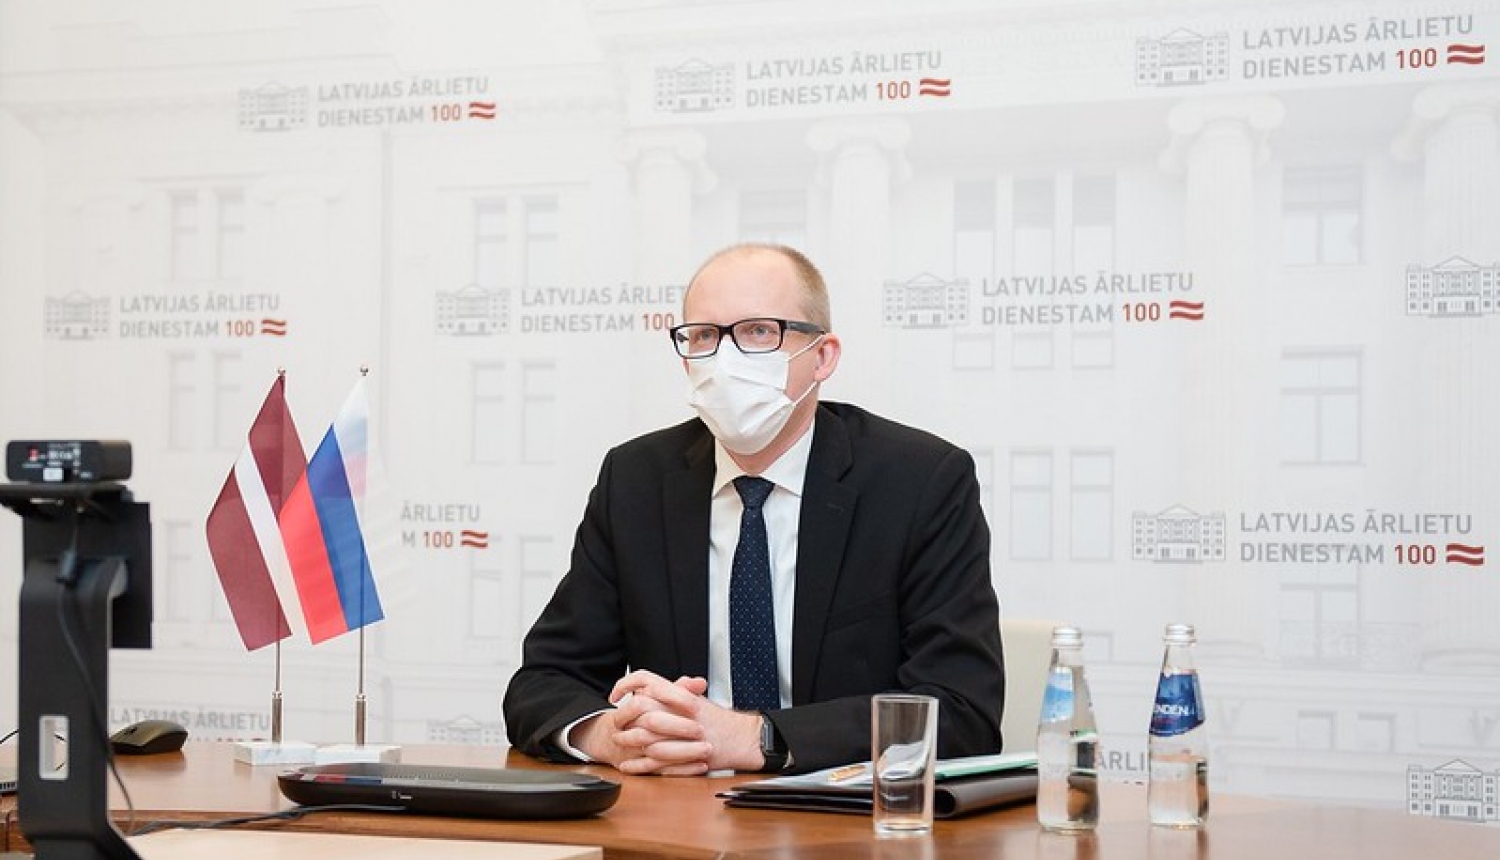 Latvian Foreign Ministry’s State Secretary, Andris Pelšs, meets the Ambassador of Russia, Yevgeny Lukyanov, during his farewell visit